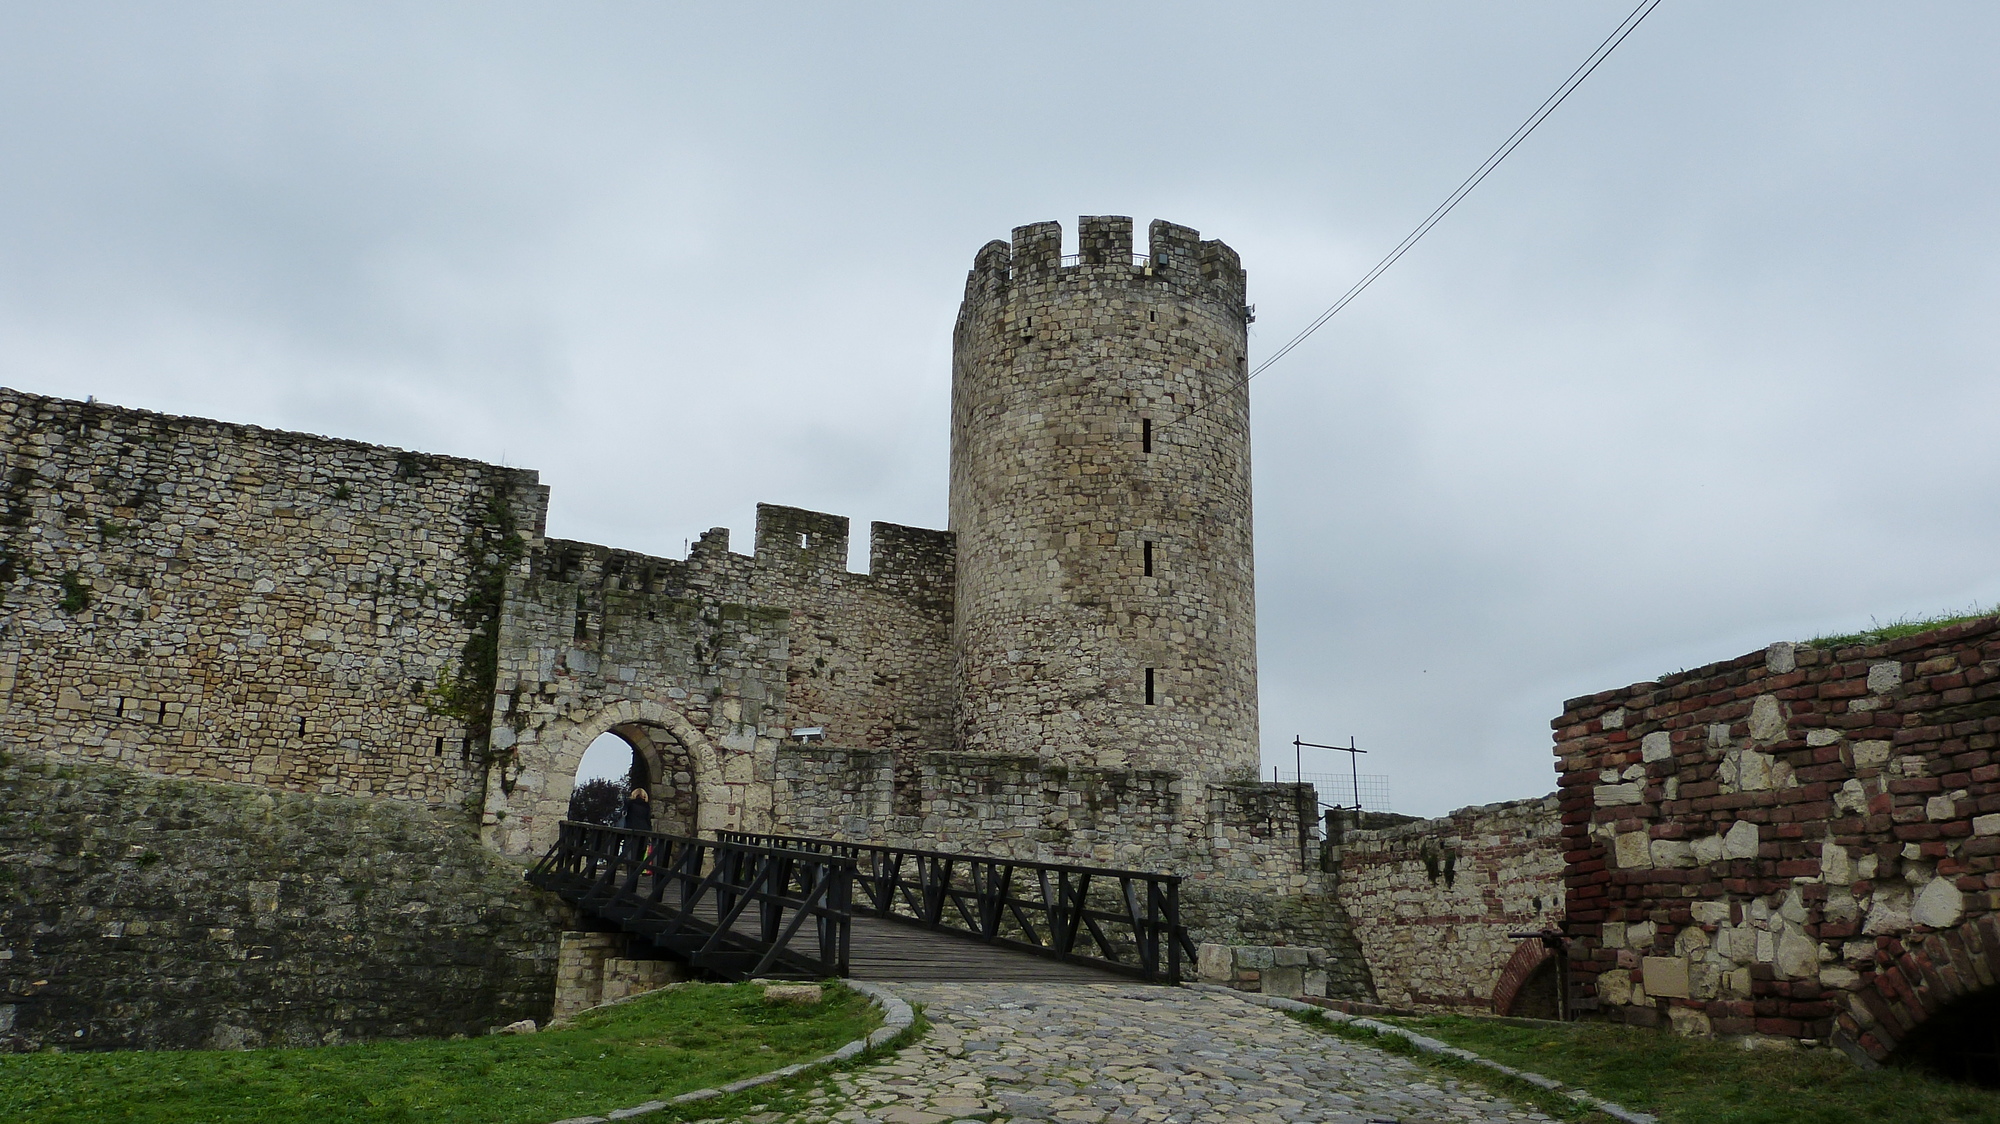 Gateway to the fortress